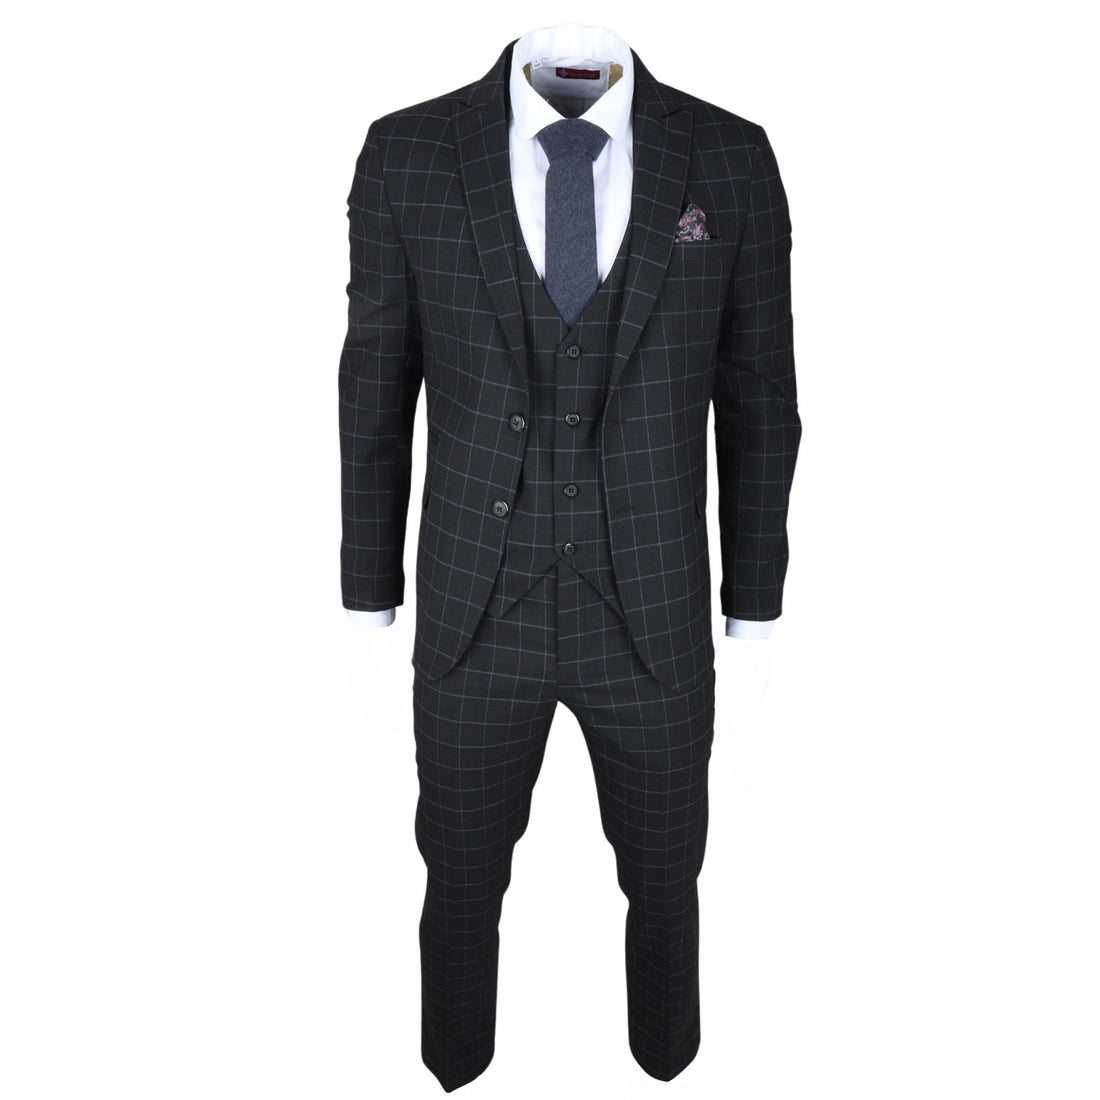 Men's Suit Black Checked Tailored Fit 3 Piece Formal Dress